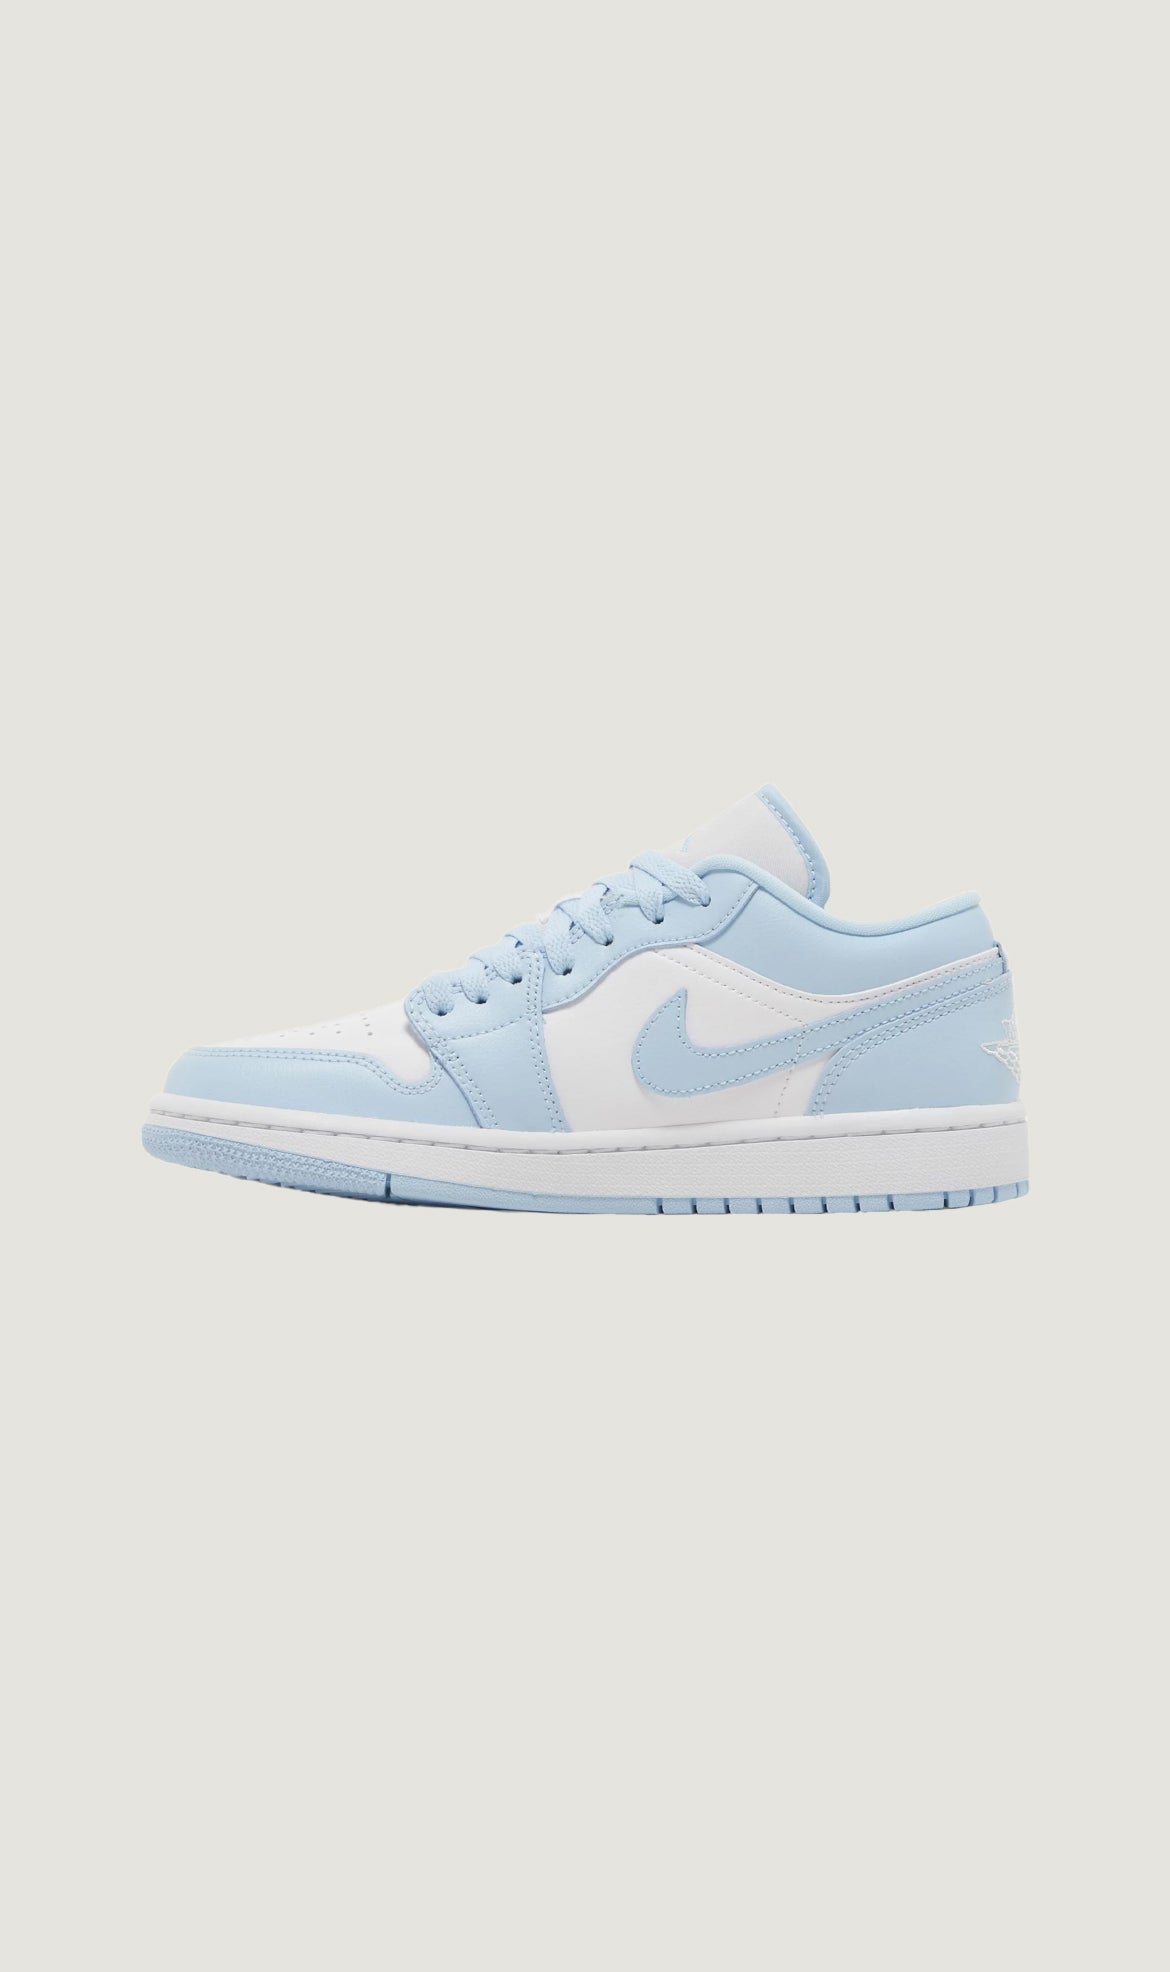 Load image into Gallery viewer, WMNS AIR JORDAN 1 LOW - ICE BLUE
